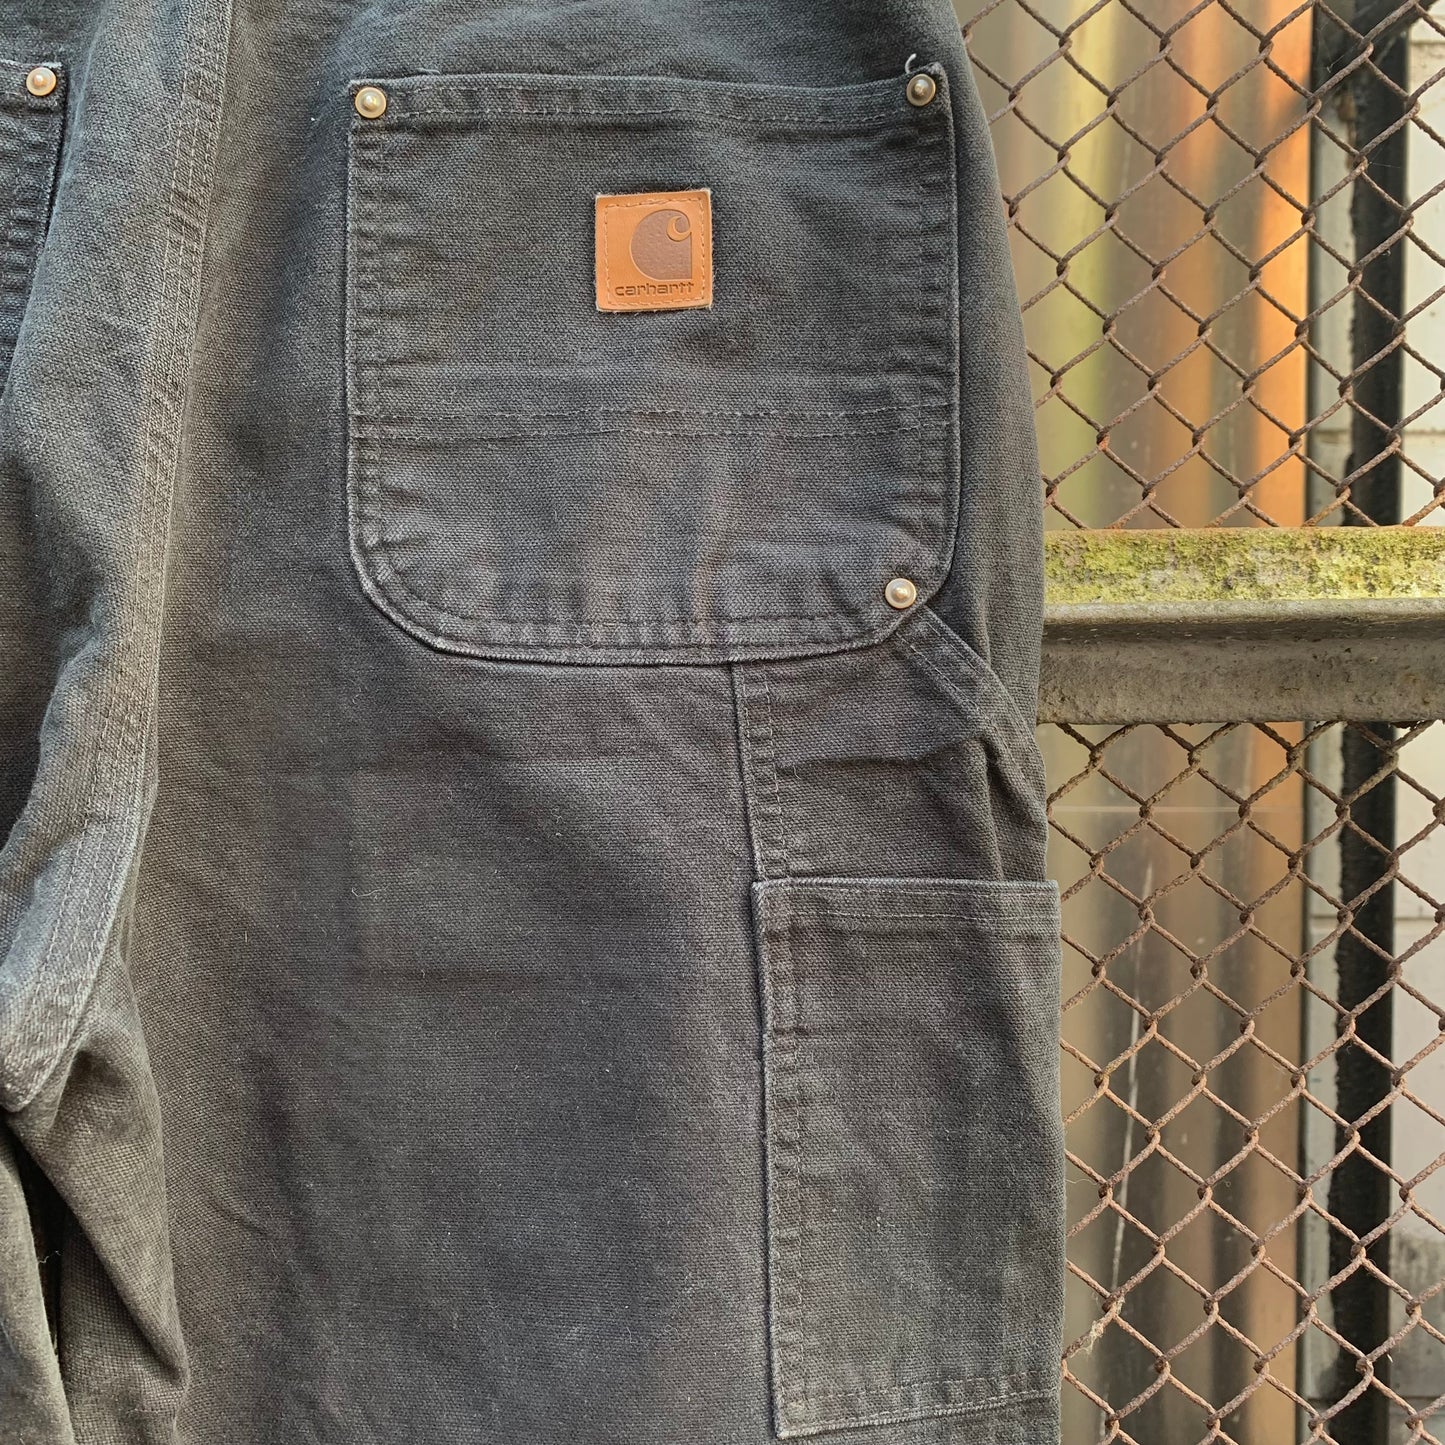 Carhartt Black Carpenter Pants with padded knees